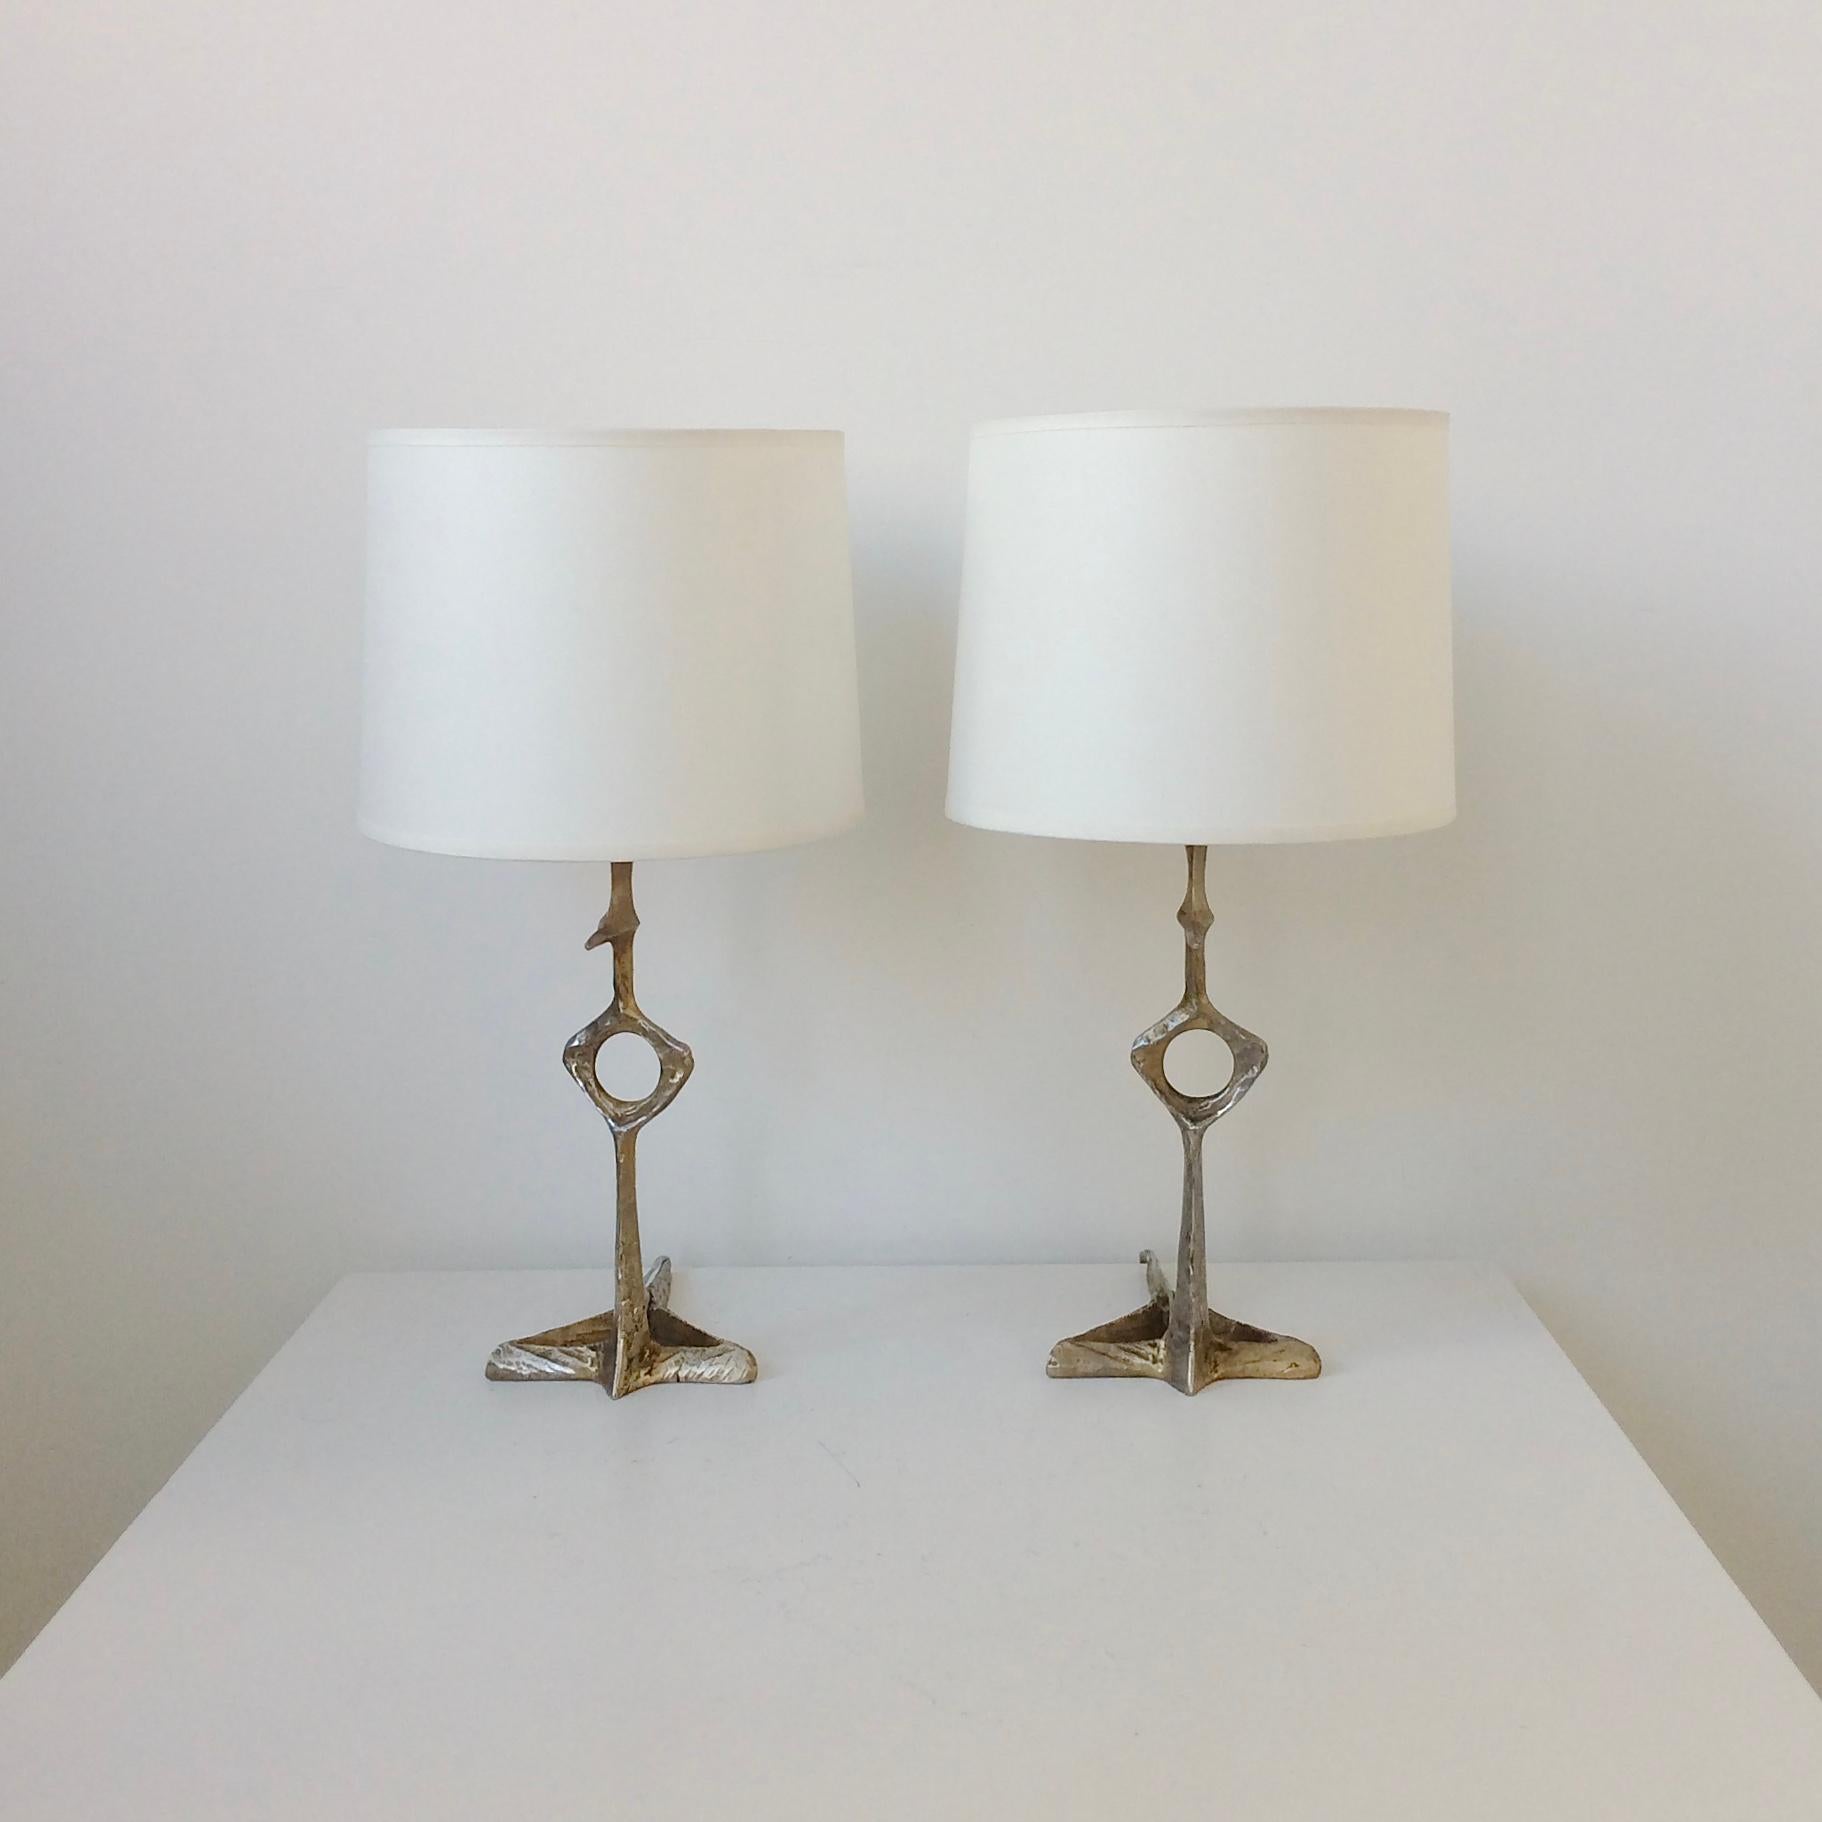 Denise Pietra Corbara Pair of Bronze Table Lamps, circa 1960, France For Sale 11